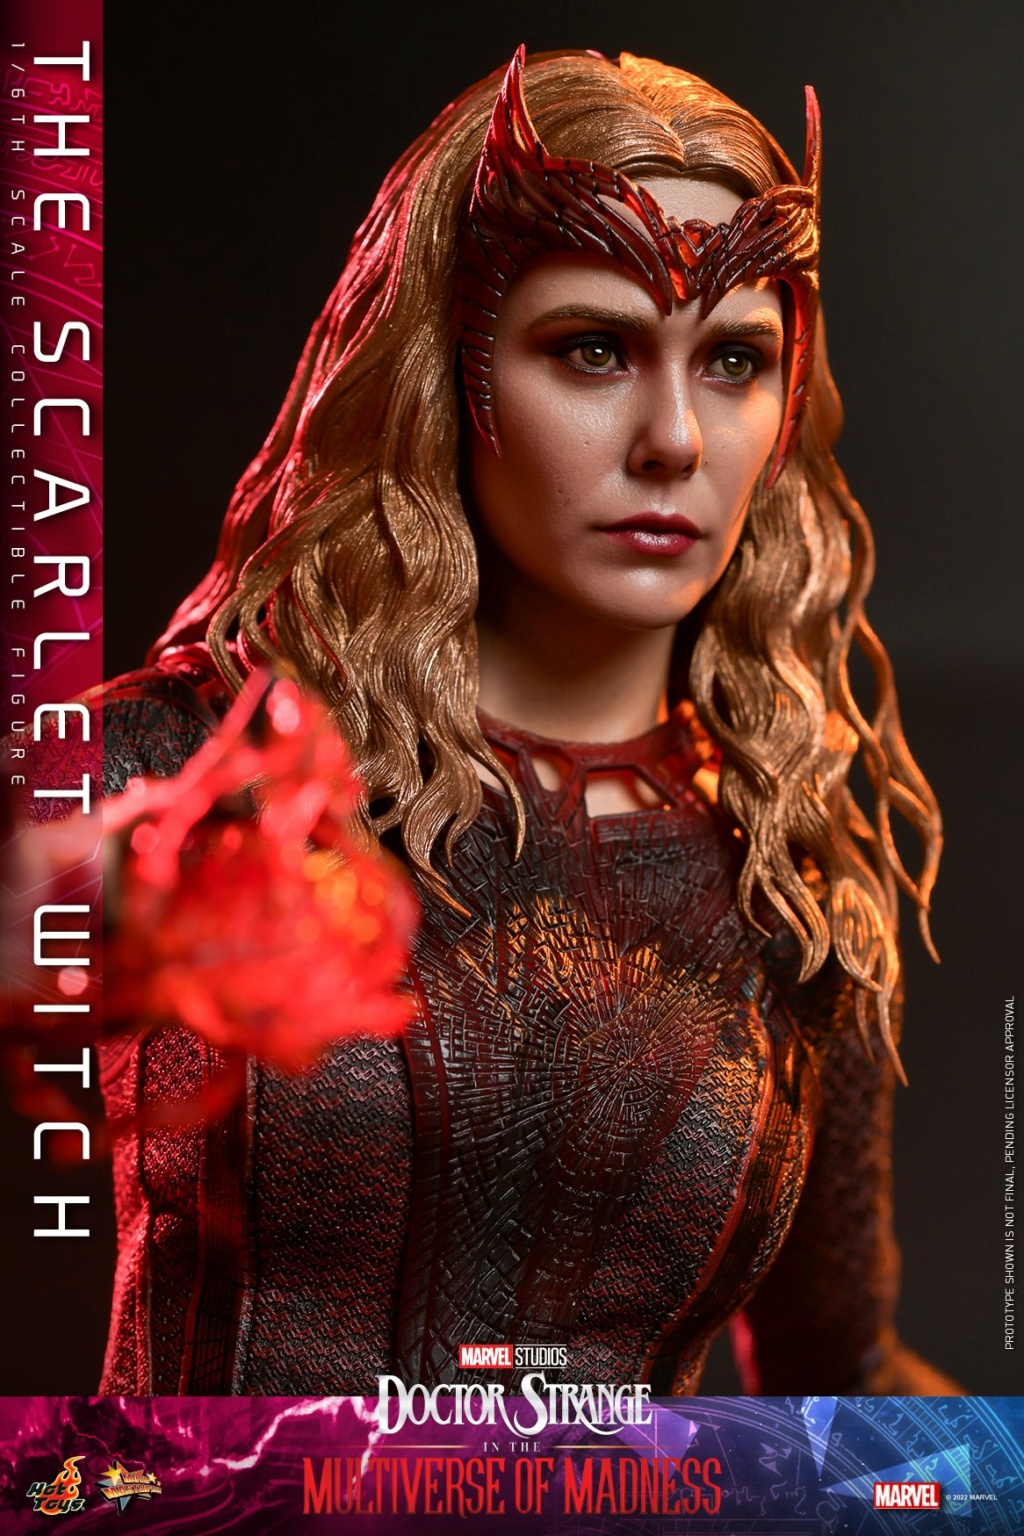 InTheMultiverseOfMadness - NEW PROUCT: HOT TOYS: Doctor Strange in the Multiverse of Madness -  1/6th scale The Scarlet Witch Collectible Figure (Deluxe Version) 2191ee10